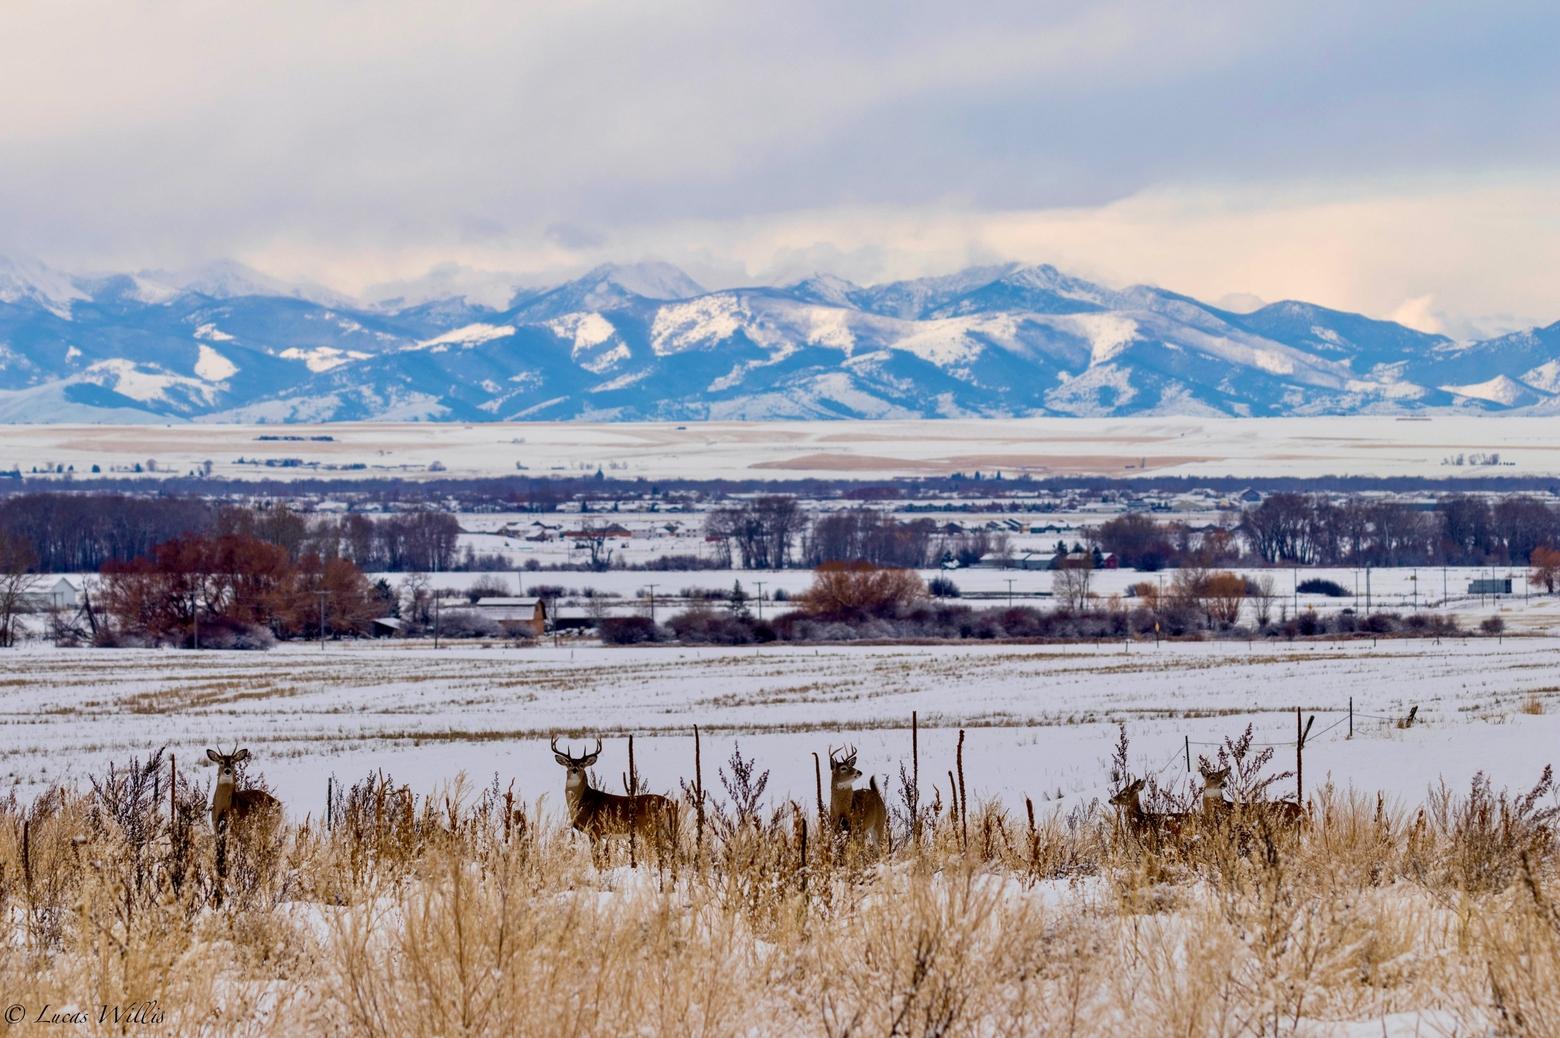 Many people have the false impression that having white-tailed deer present means "wildlife populations" are healthy and abundant. But white-tails, pictured here in the Gallatin Valley, are notoriously "weedy" species—highly adaptable like skunks, raccoons and coyotes that can live in almost every altered landscape. Sprawl, in fact, favors whitetails but it wreaks havoc on vital habitat (especially when there are roaming dogs, fences, roads and traffic) for species that have more specific needs, like grizzlies and elk, mule deer, pronghorn, moose and sensitive songbirds.  Photo by Lucas Willis/Shutterstock ID: 1291252909